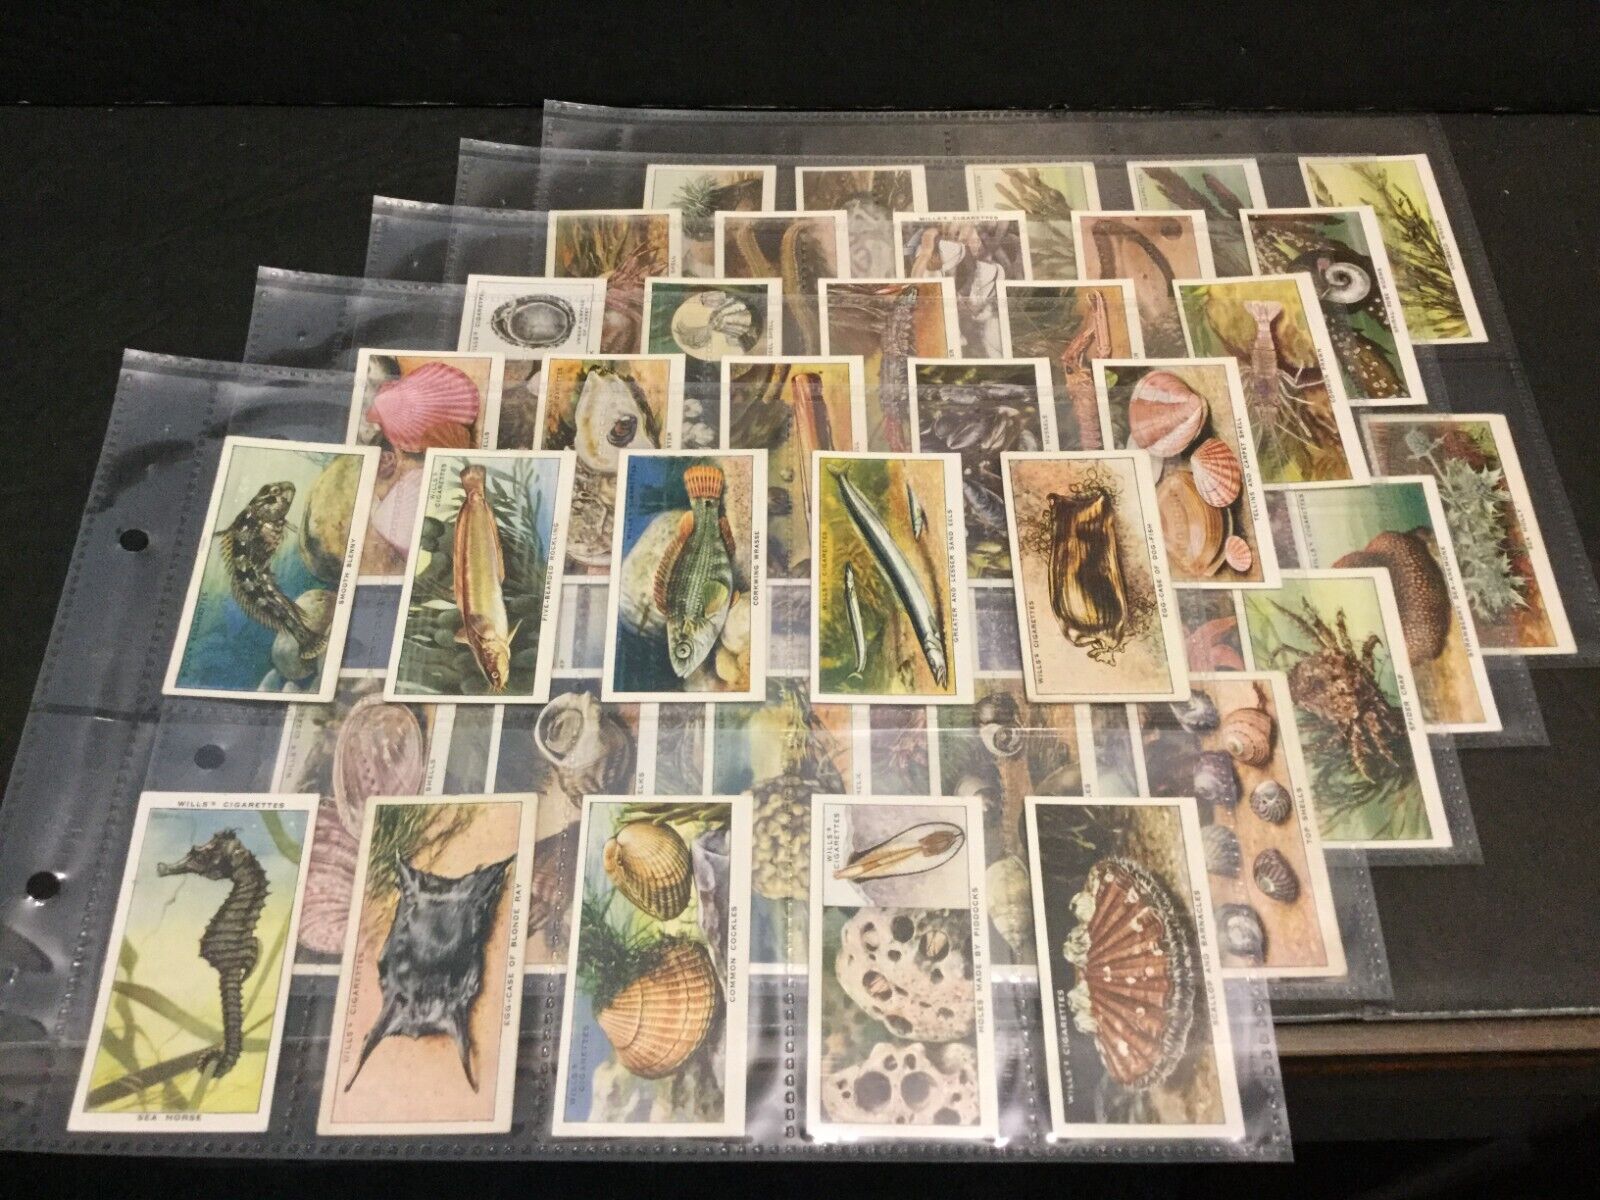 1938 Wills Sea-Shore Set of 50 Cards in Plastic Sheets Sku853S